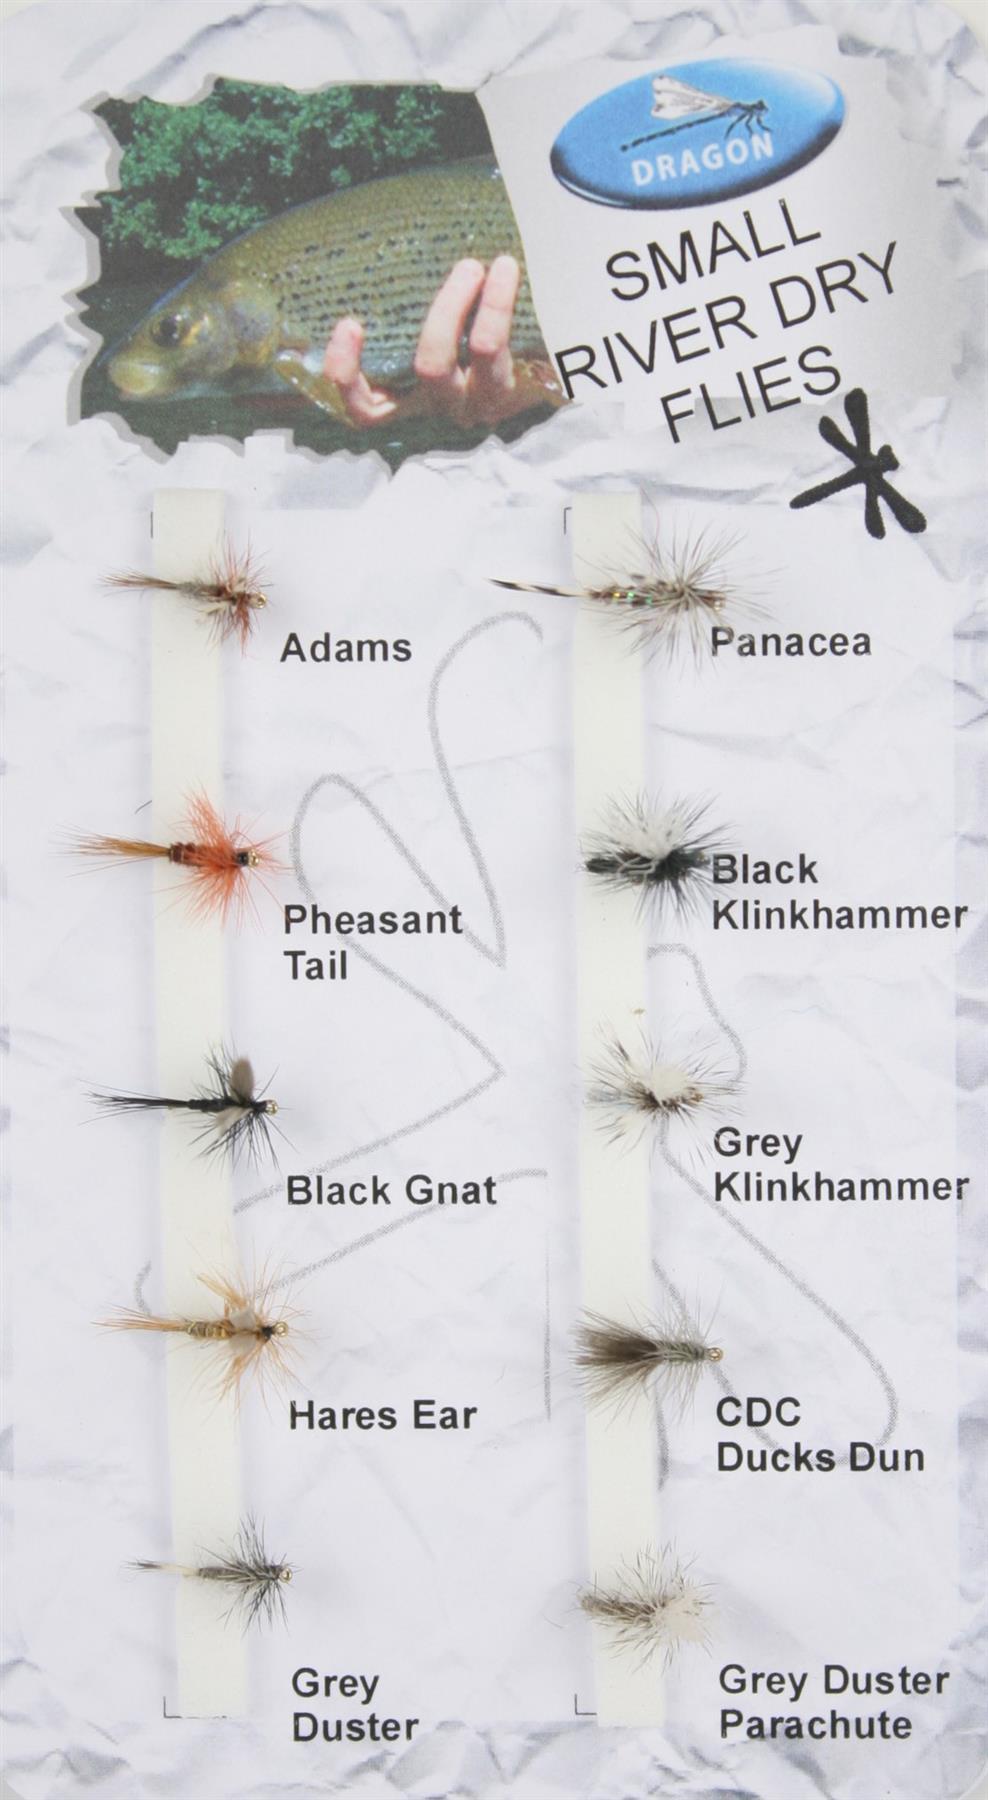 Dragon Tackle Trout & Grayling River Flies Small Dries 